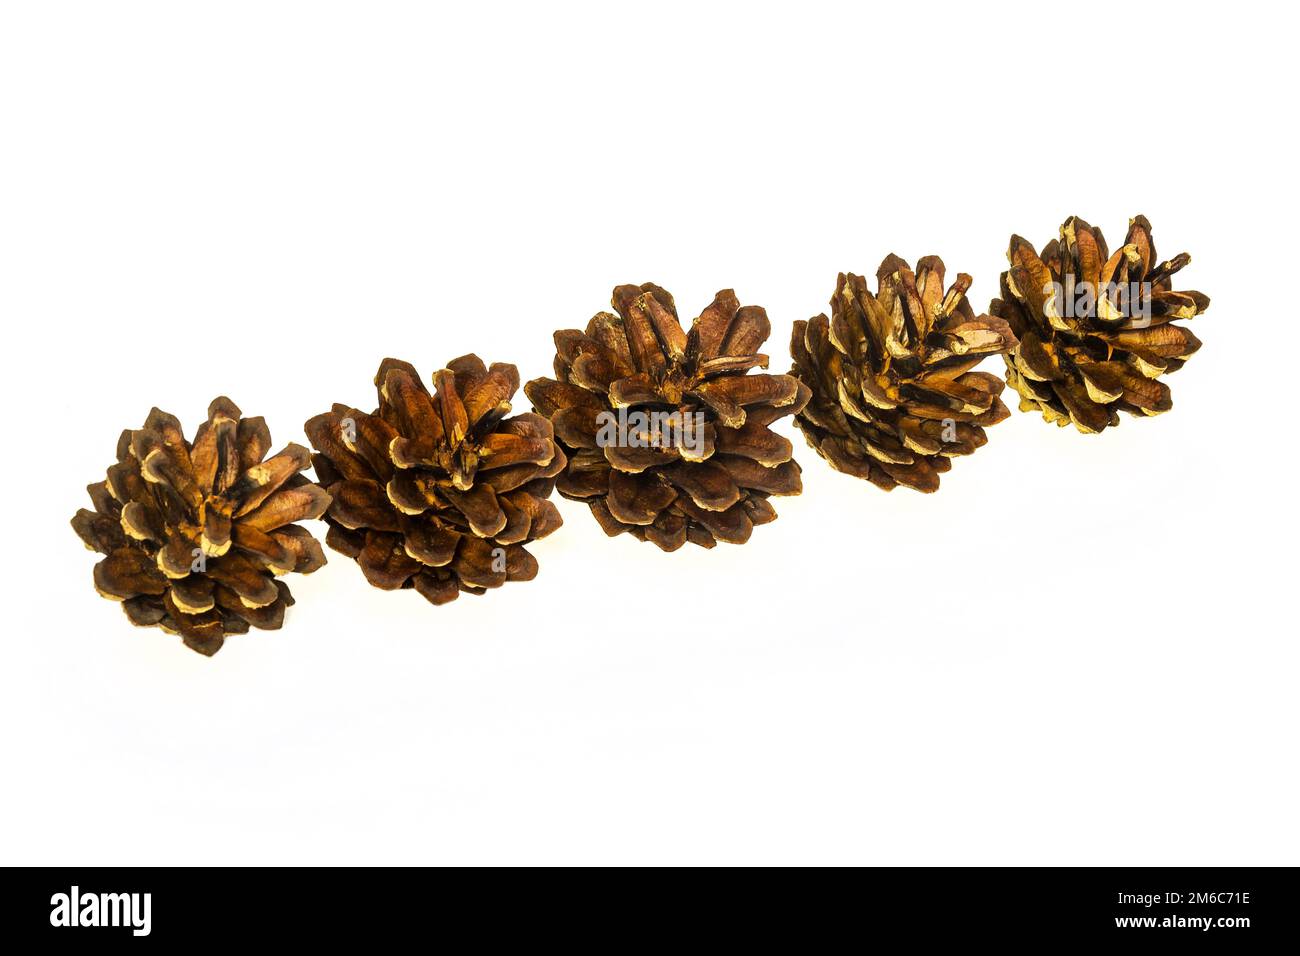 On a light surface there are five pine cones Stock Photo